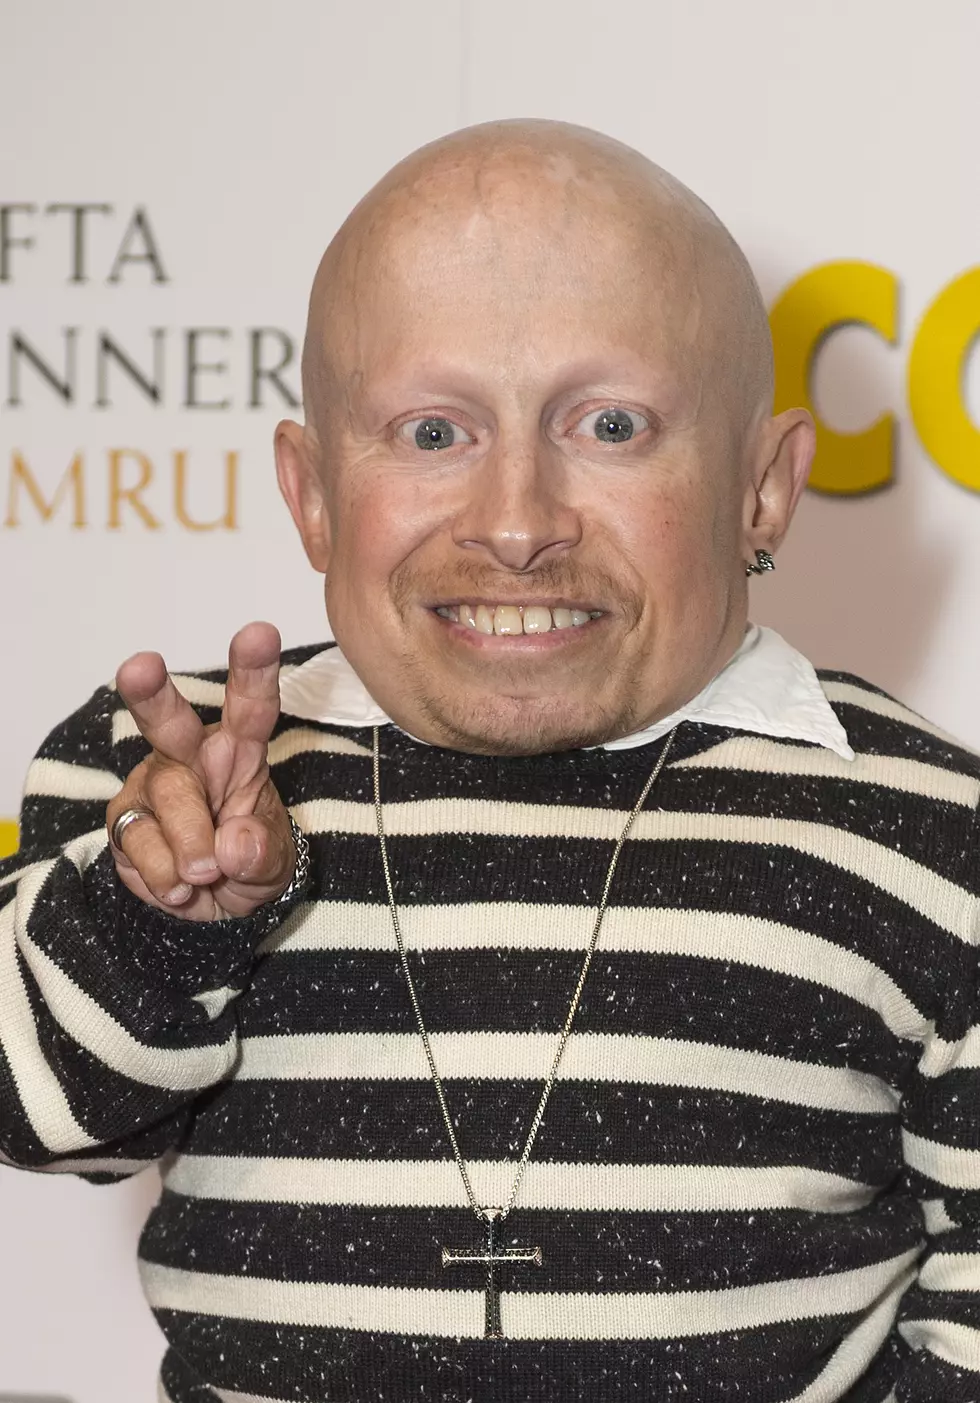 Everybody Is Making A “Hotline Bling” Video, Including Verne Troyer